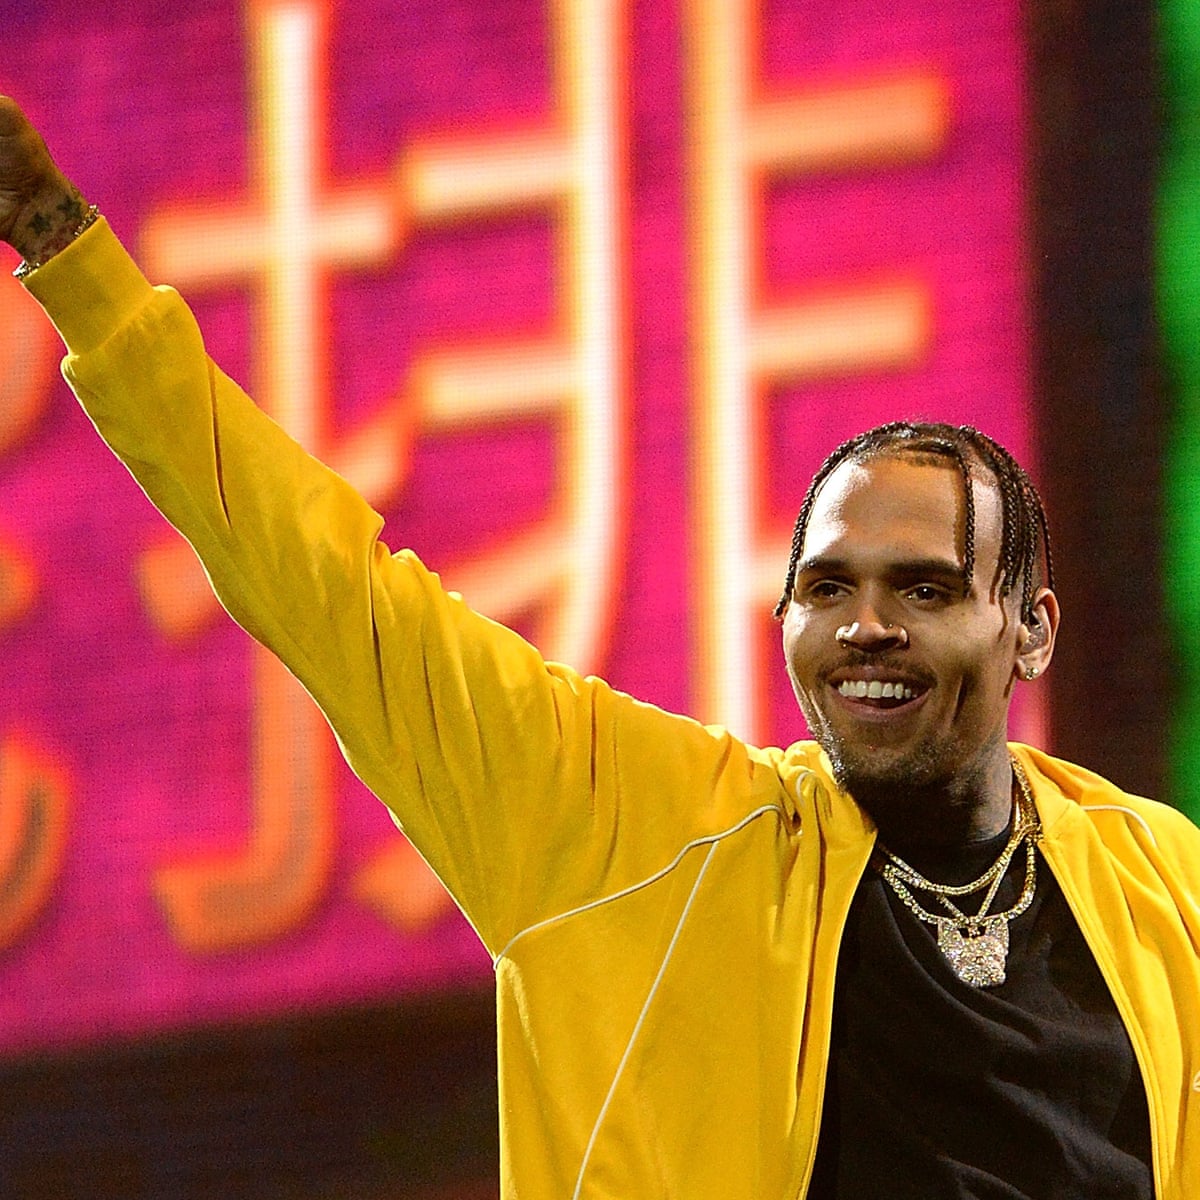 45 Songs By Chris Brown Anyone Why Albums Are Getting Longer Chris Brown The Guardian